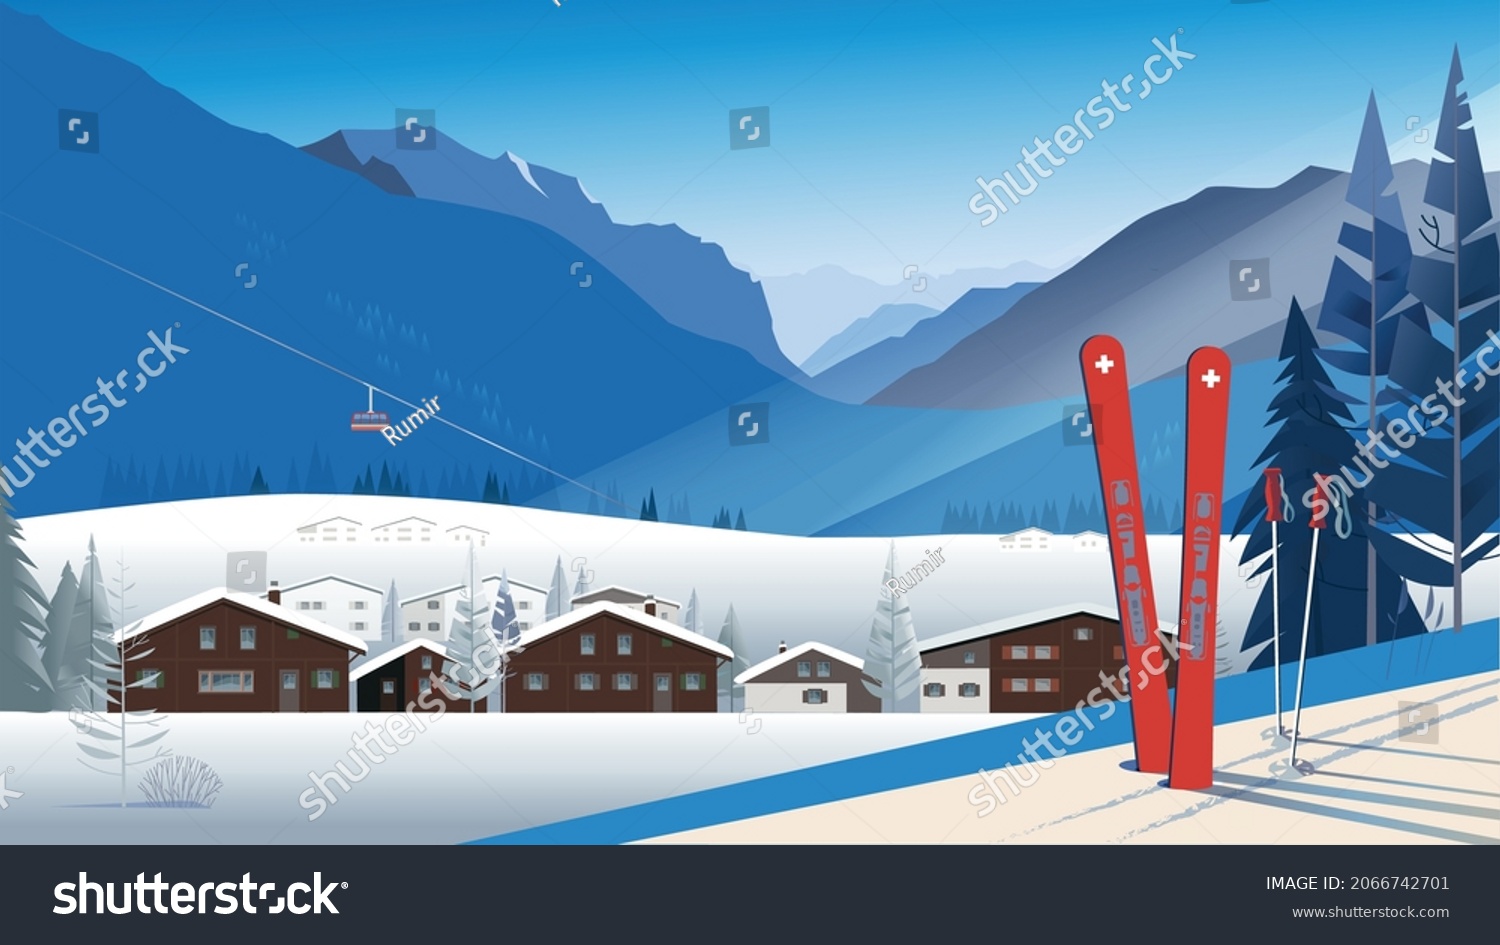 SVG of Ski resort on a bright sunny day. Panoramic view of a traditional Alpine village in front of the mountains with a cable car in the distance. Skiing in a snowdrift. svg